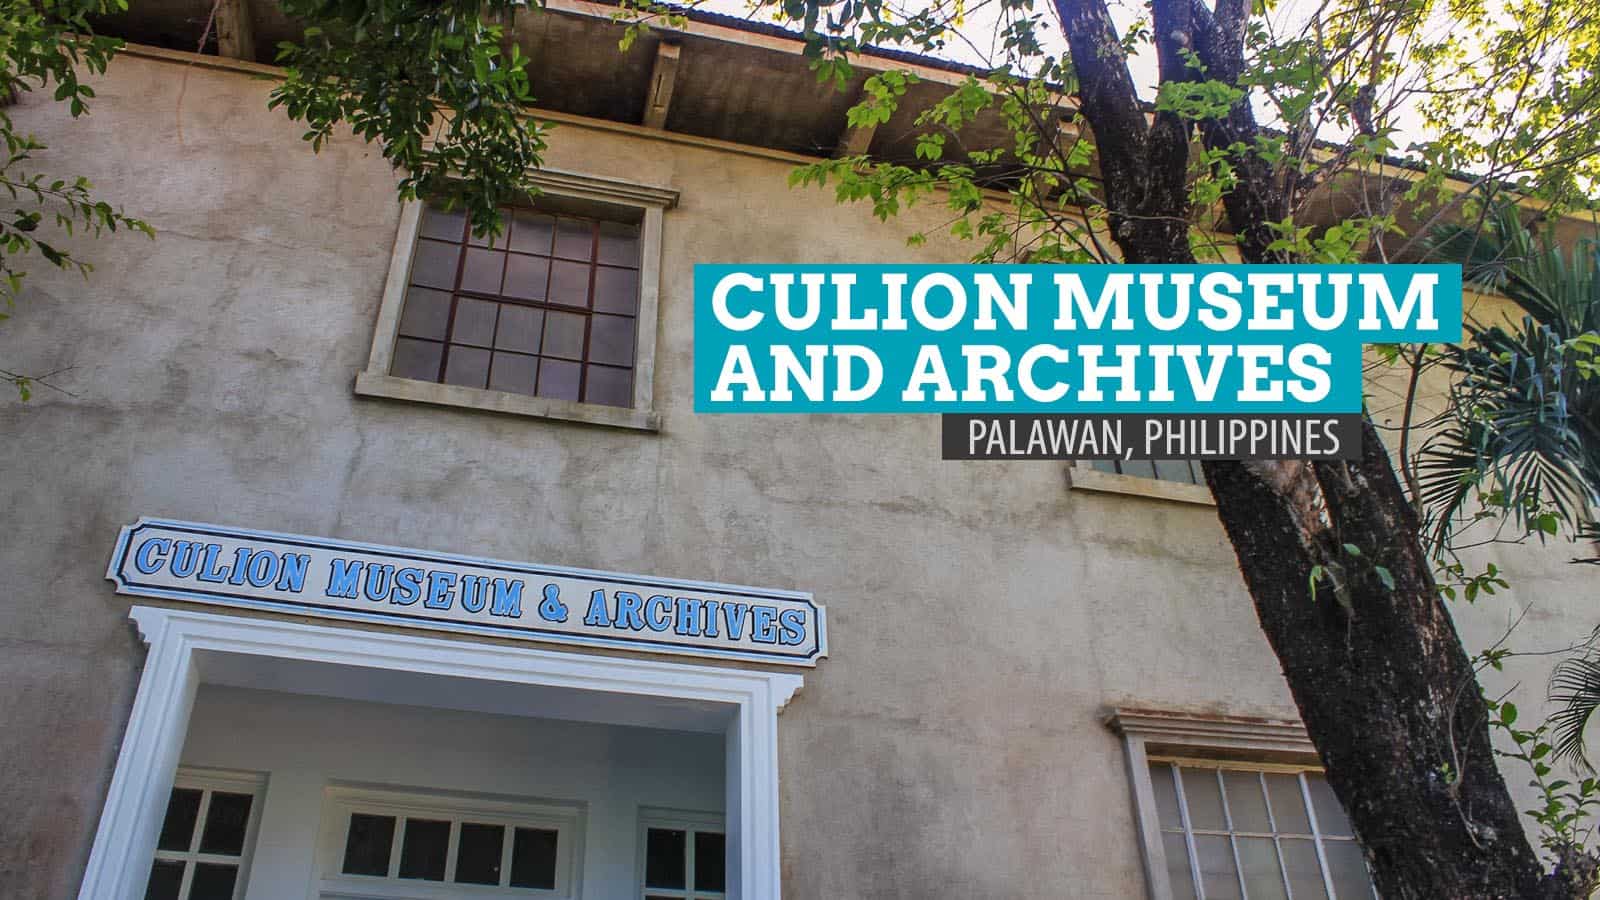 Culion Museum and Archives, Palawan: Remnants and Descendants